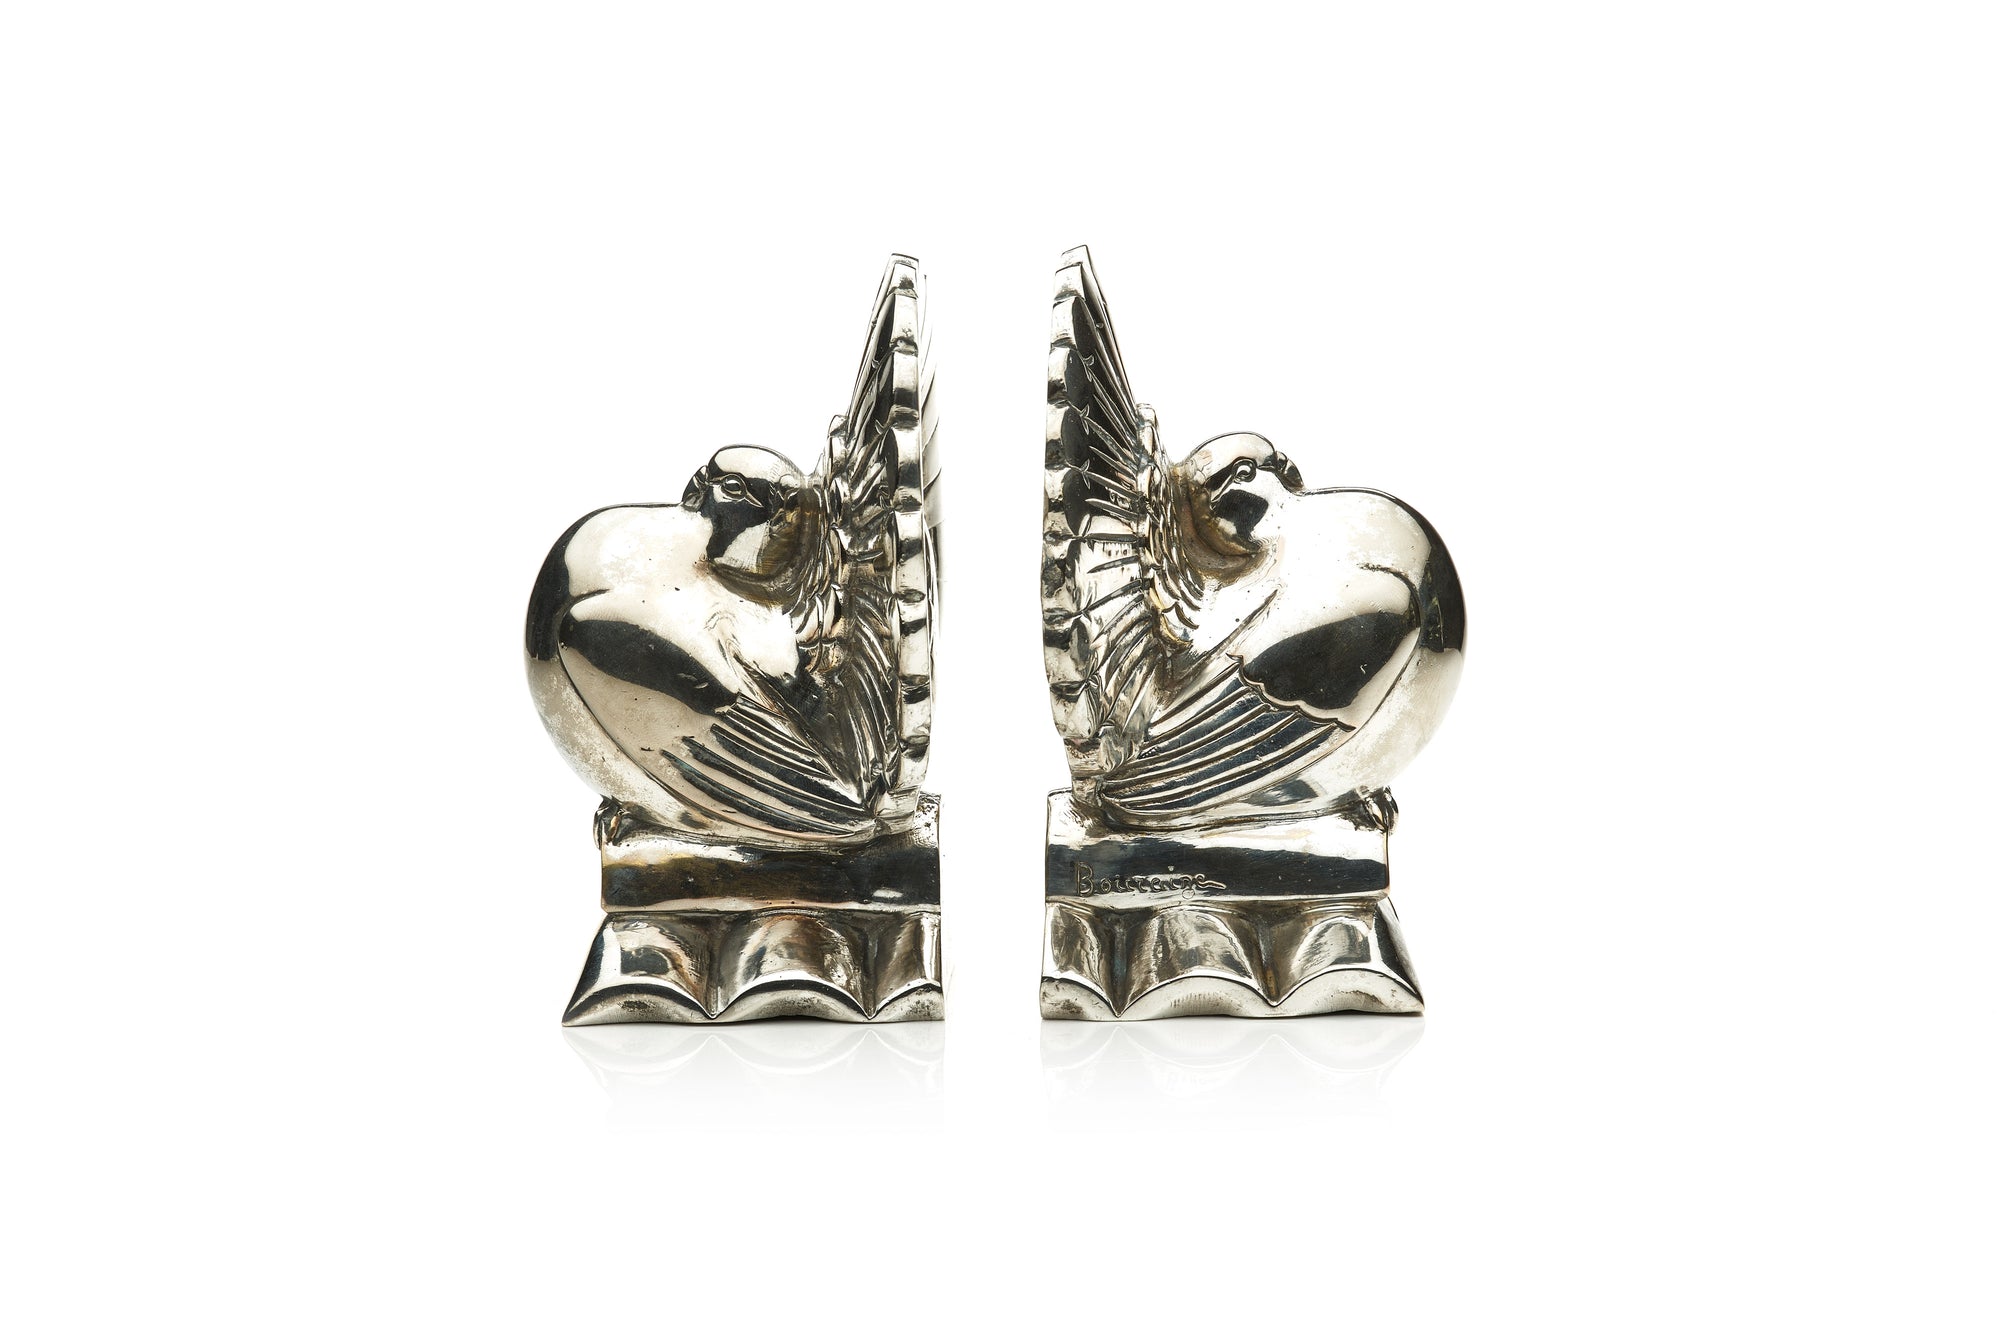 French Bookends, M. Bouraine